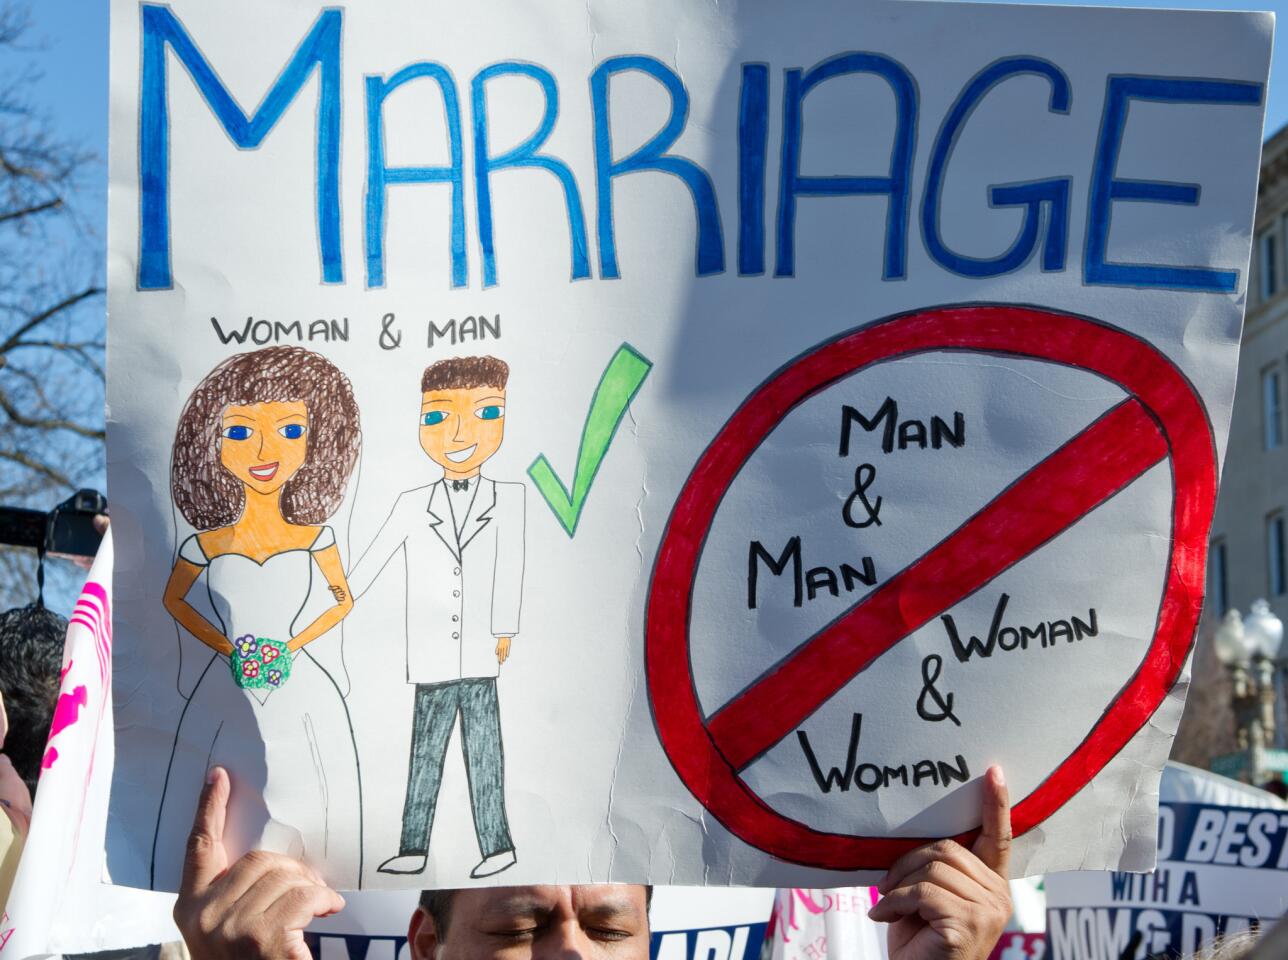 Against gay marriage: Right vs. wrong